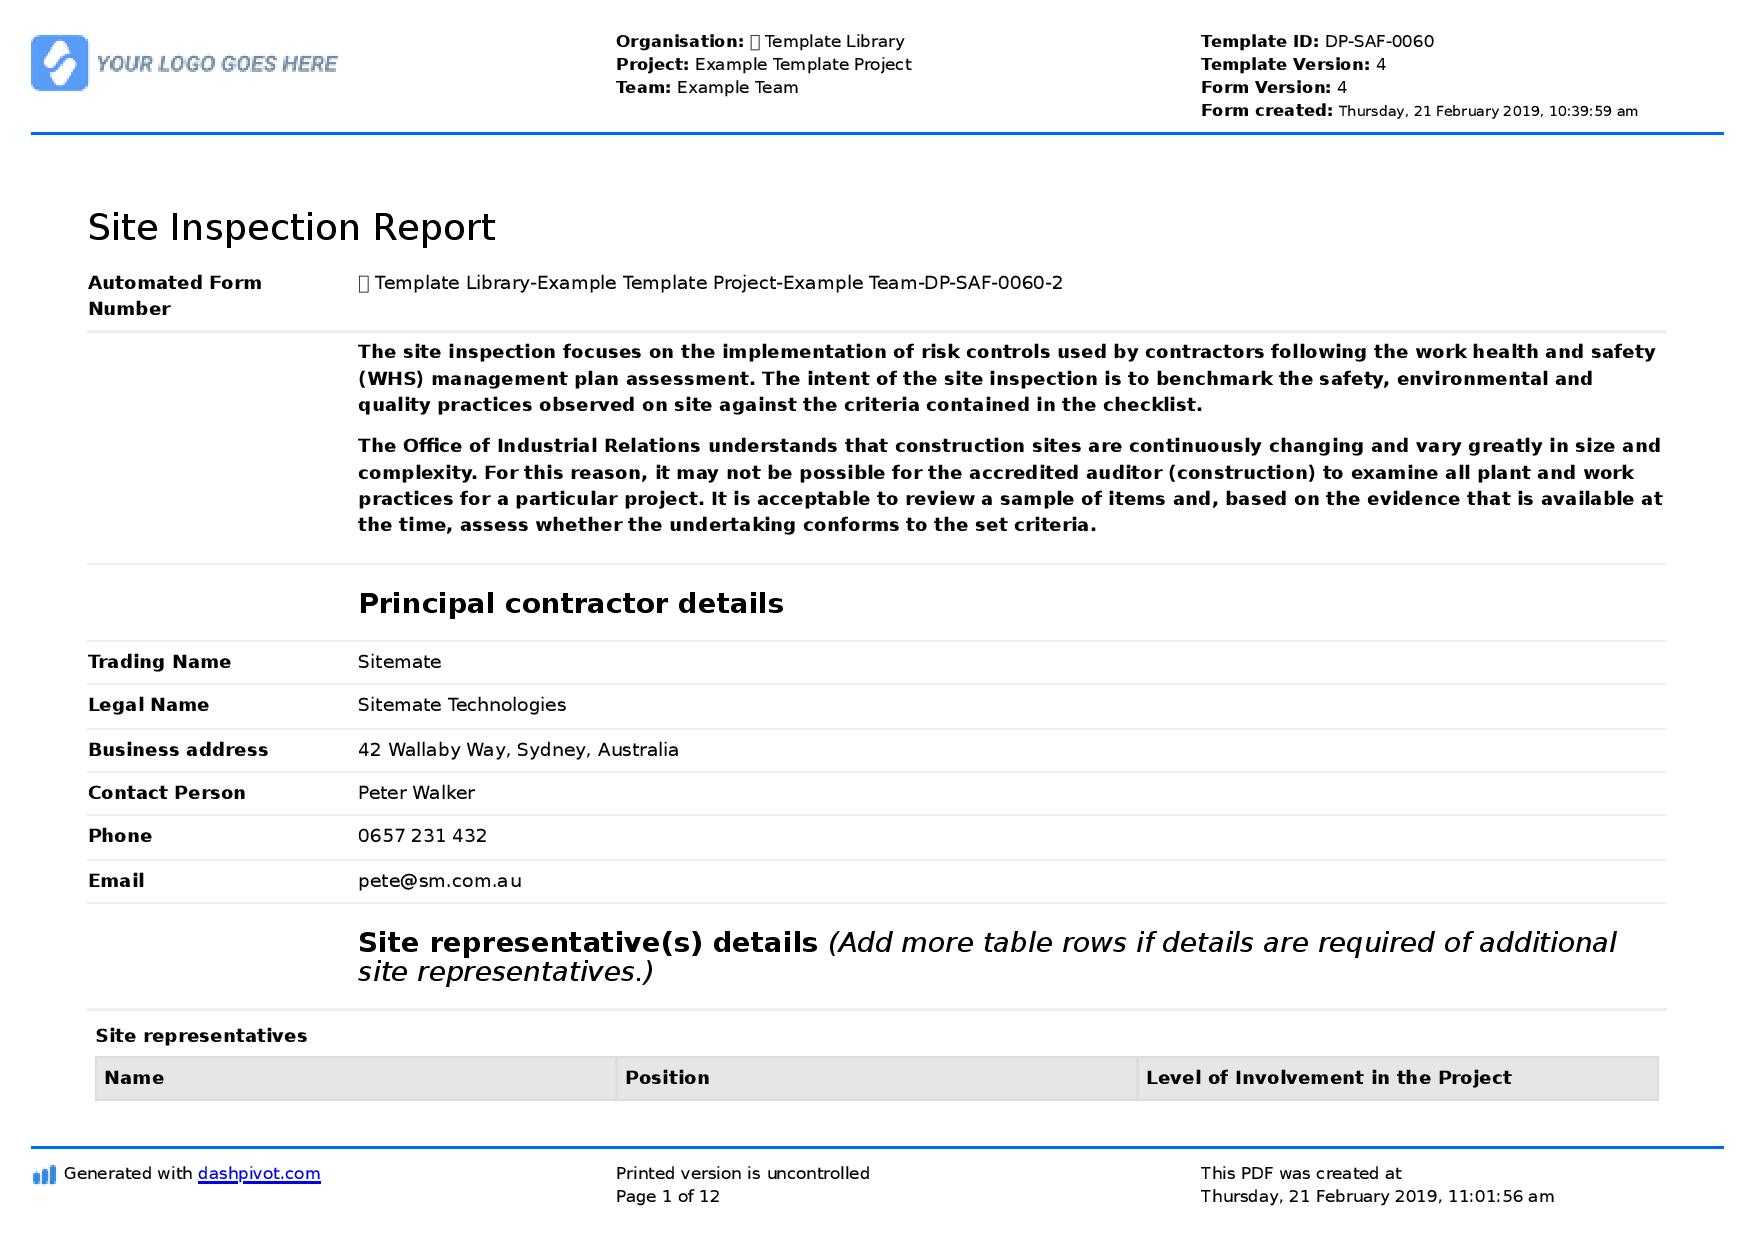 Site Inspection Report: Free Template, Sample And A Proven Regarding Engineering Inspection Report Template